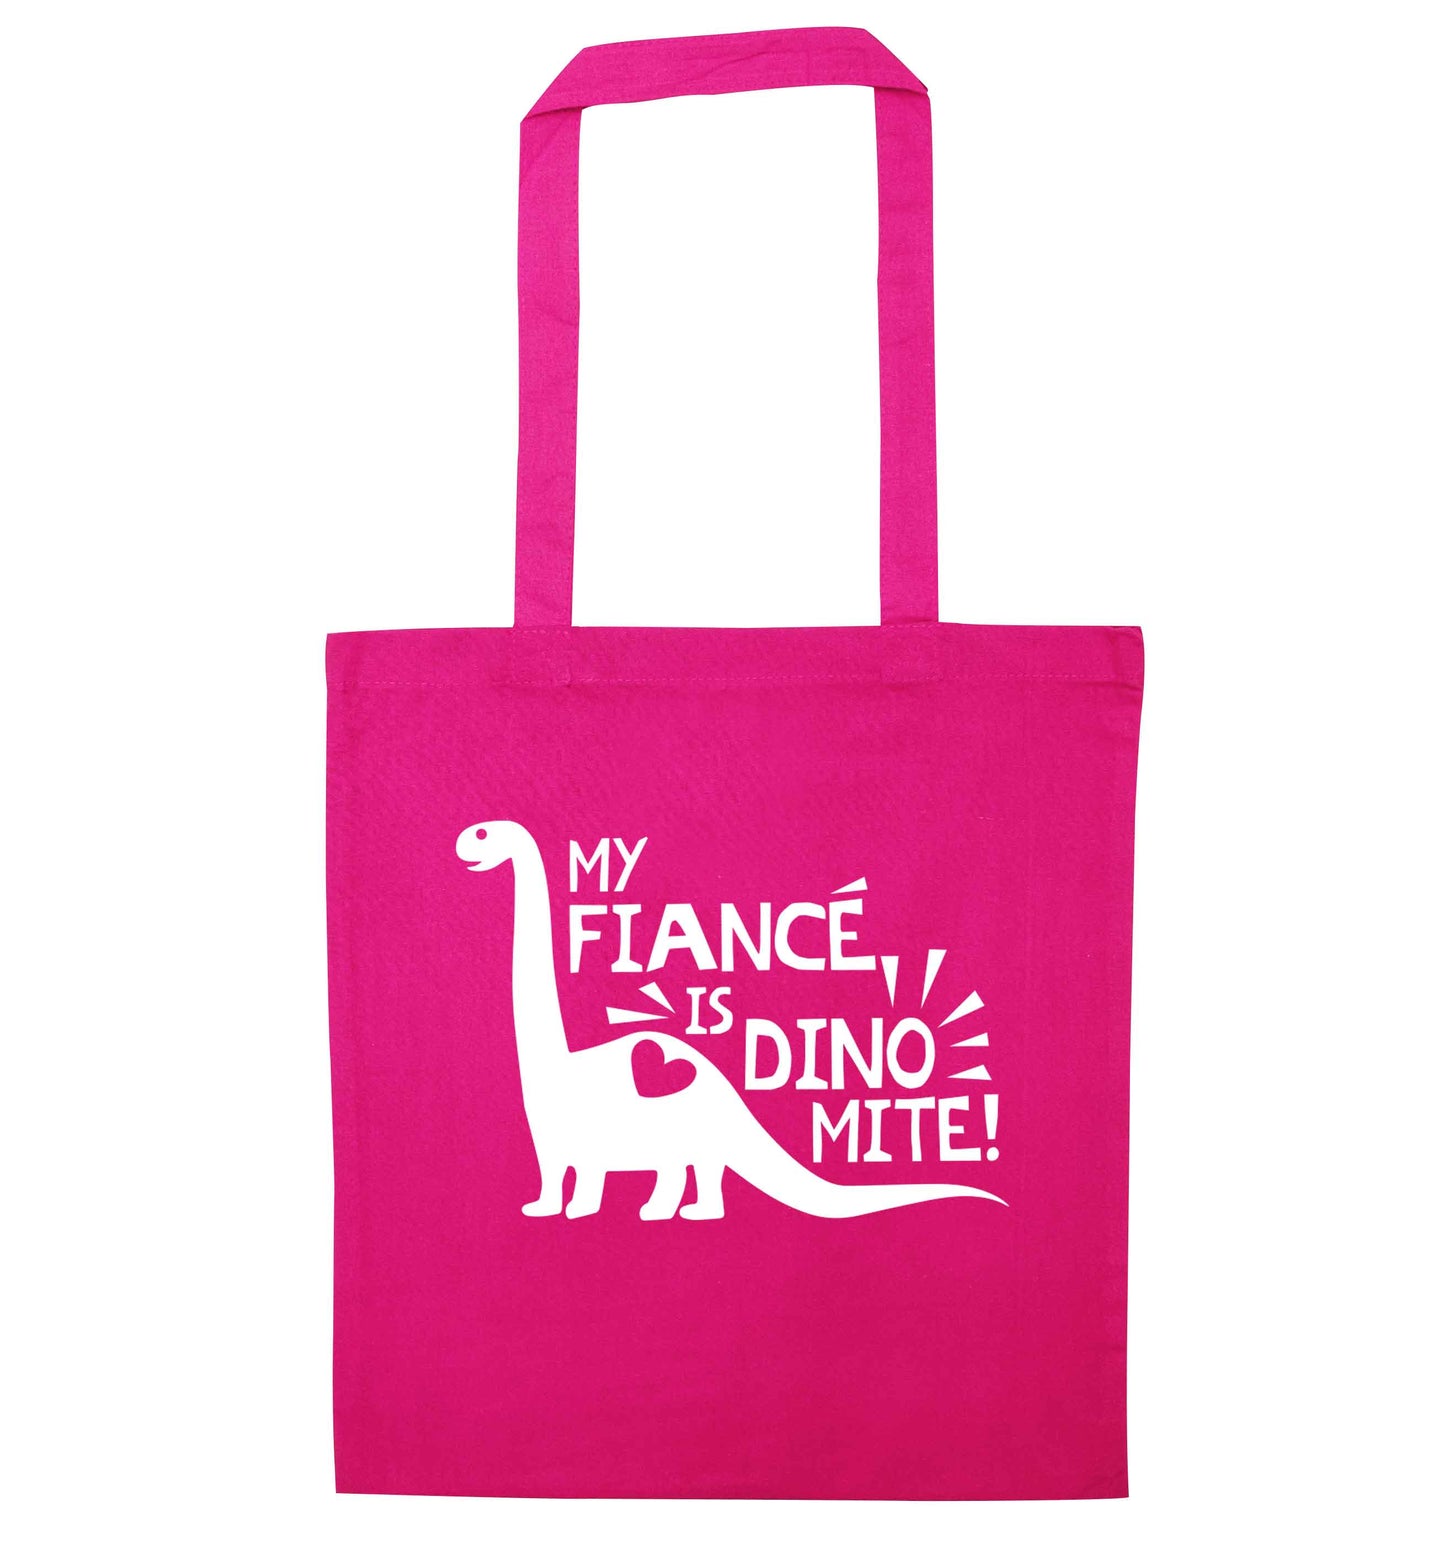 My fiance is dinomite! pink tote bag